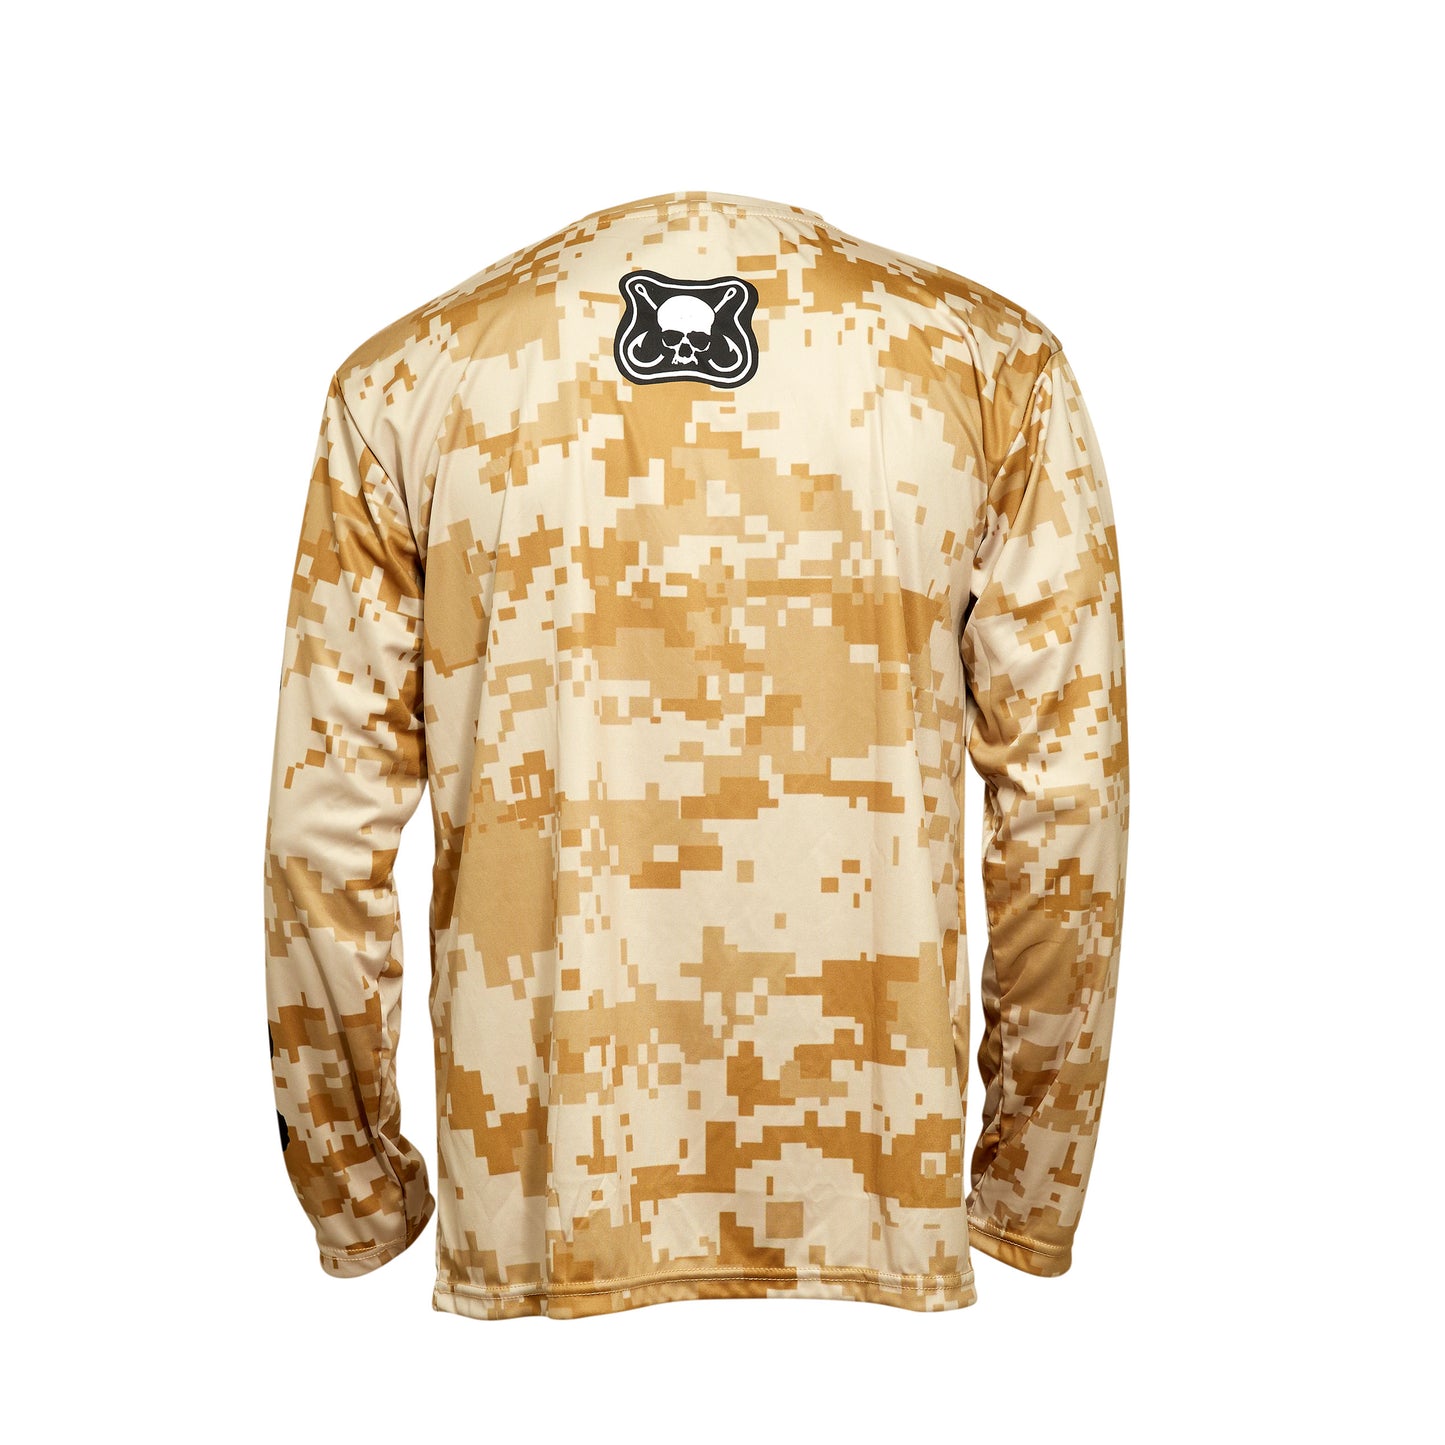 Dead Fish Hook long sleeve performance fishing shirt brown camouflage print and brand logo center top back